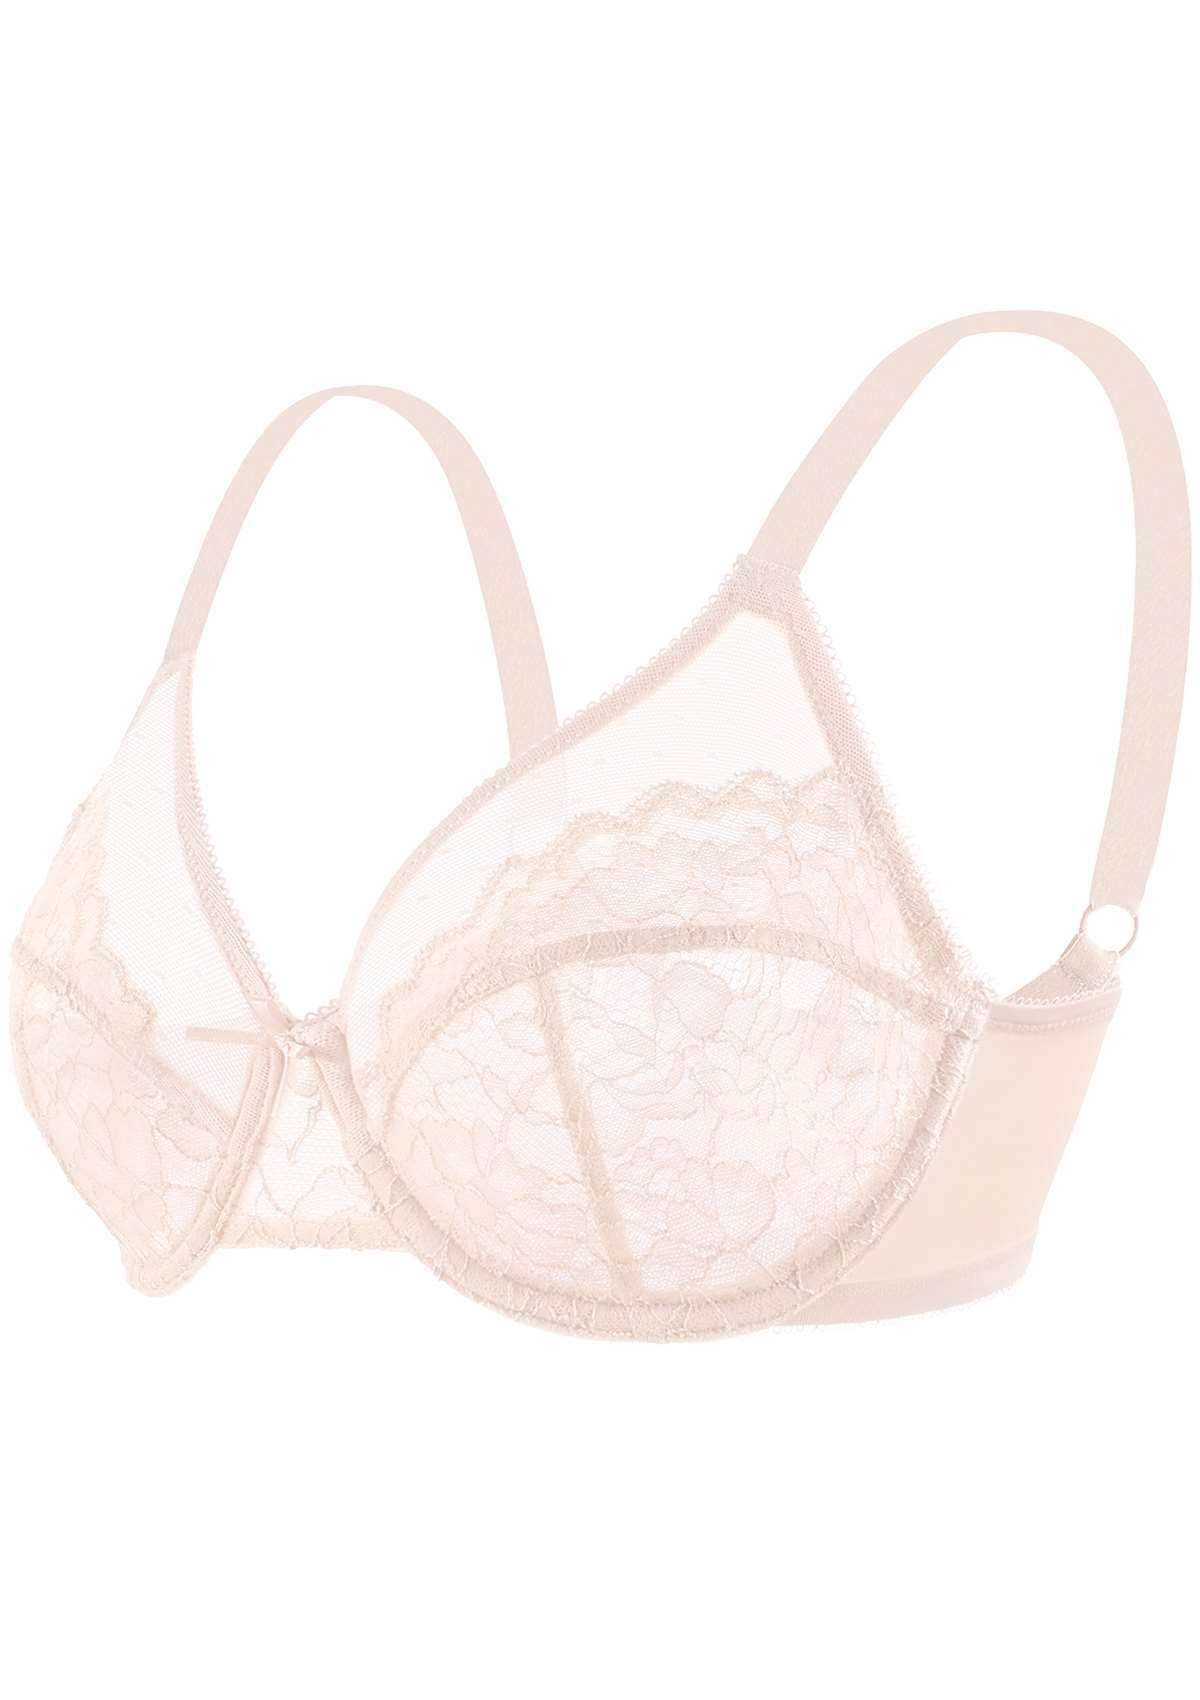 HSIA Enchante Lacy Bra: Comfy Sheer Lace Bra With Lift - Pink / 36 / DDD/F